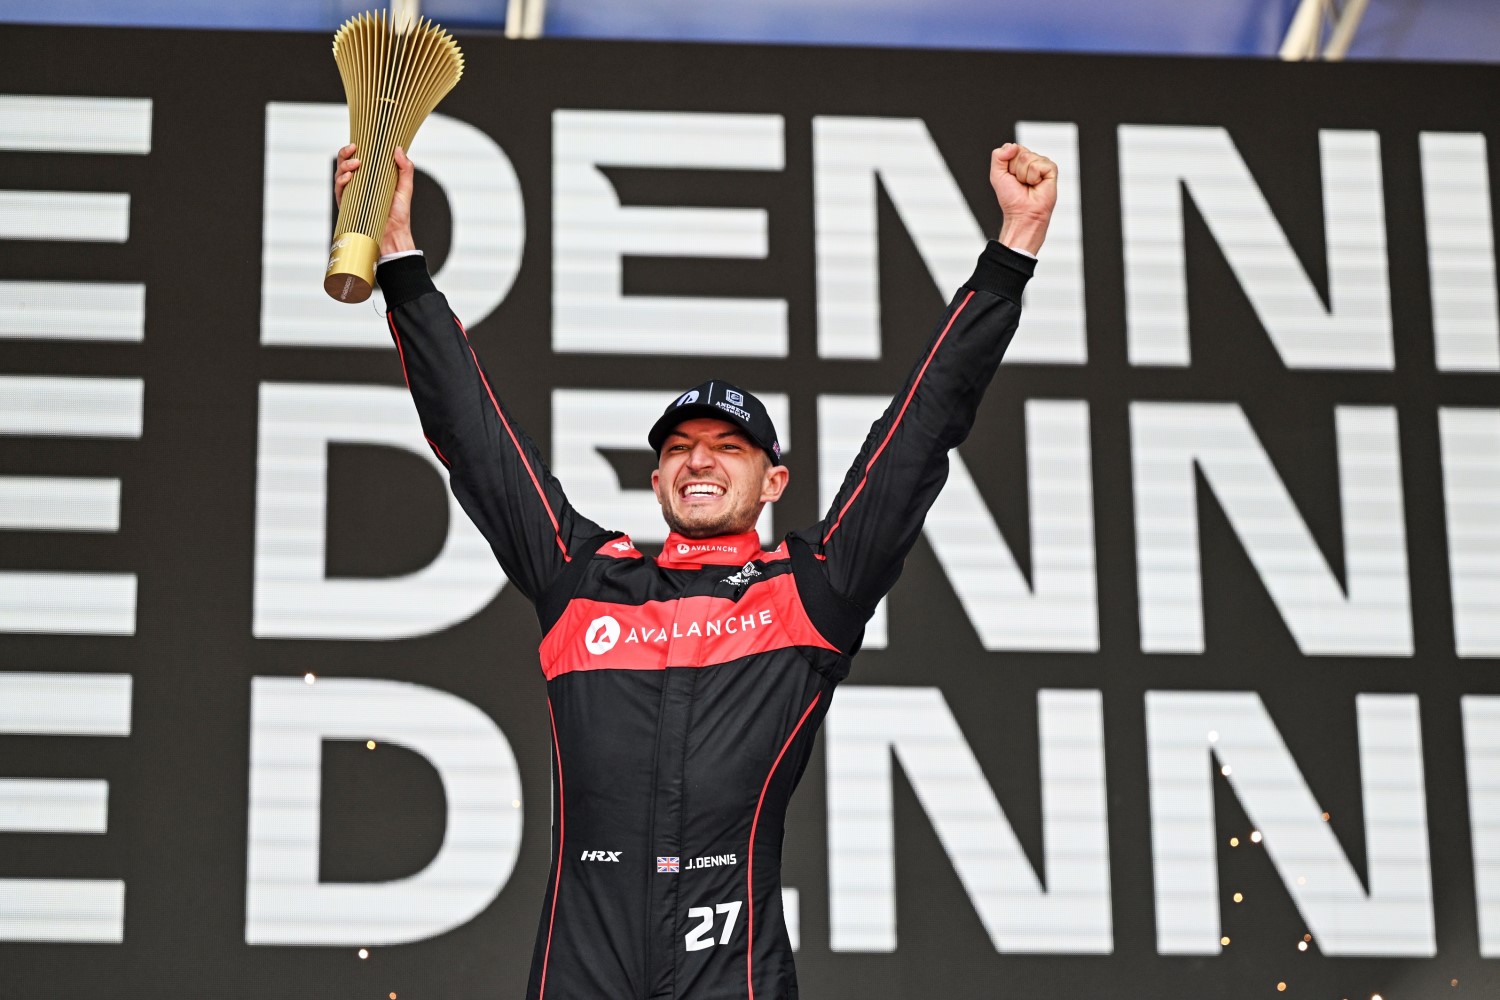 Jake Dennis, Avalanche Andretti Formula E, 1st position, with his trophy on the podium during the Rome ePrix II at Circuito Cittadino dell'EUR on Sunday July 16, 2023 in Rome, Italy. (Photo by Simon Galloway / LAT Images)